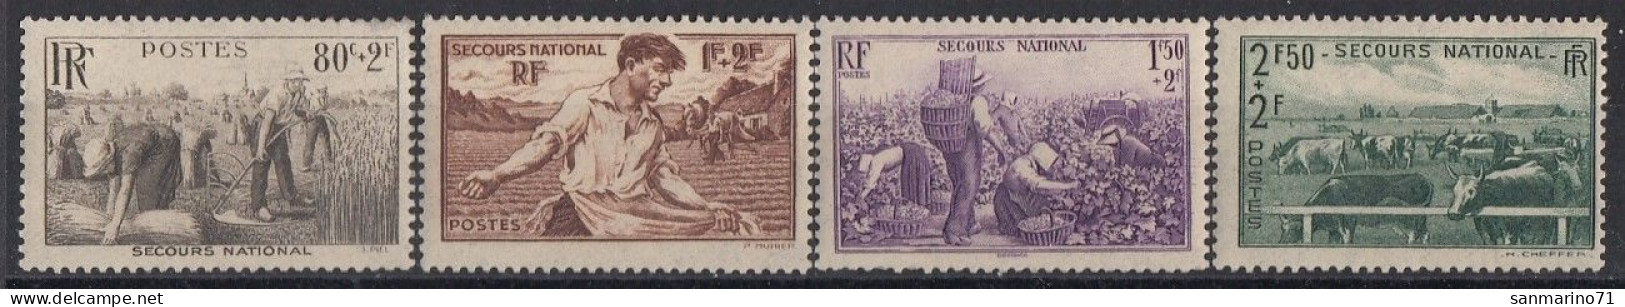 FRANCE 496-499,unused,falc Hinged - Agriculture